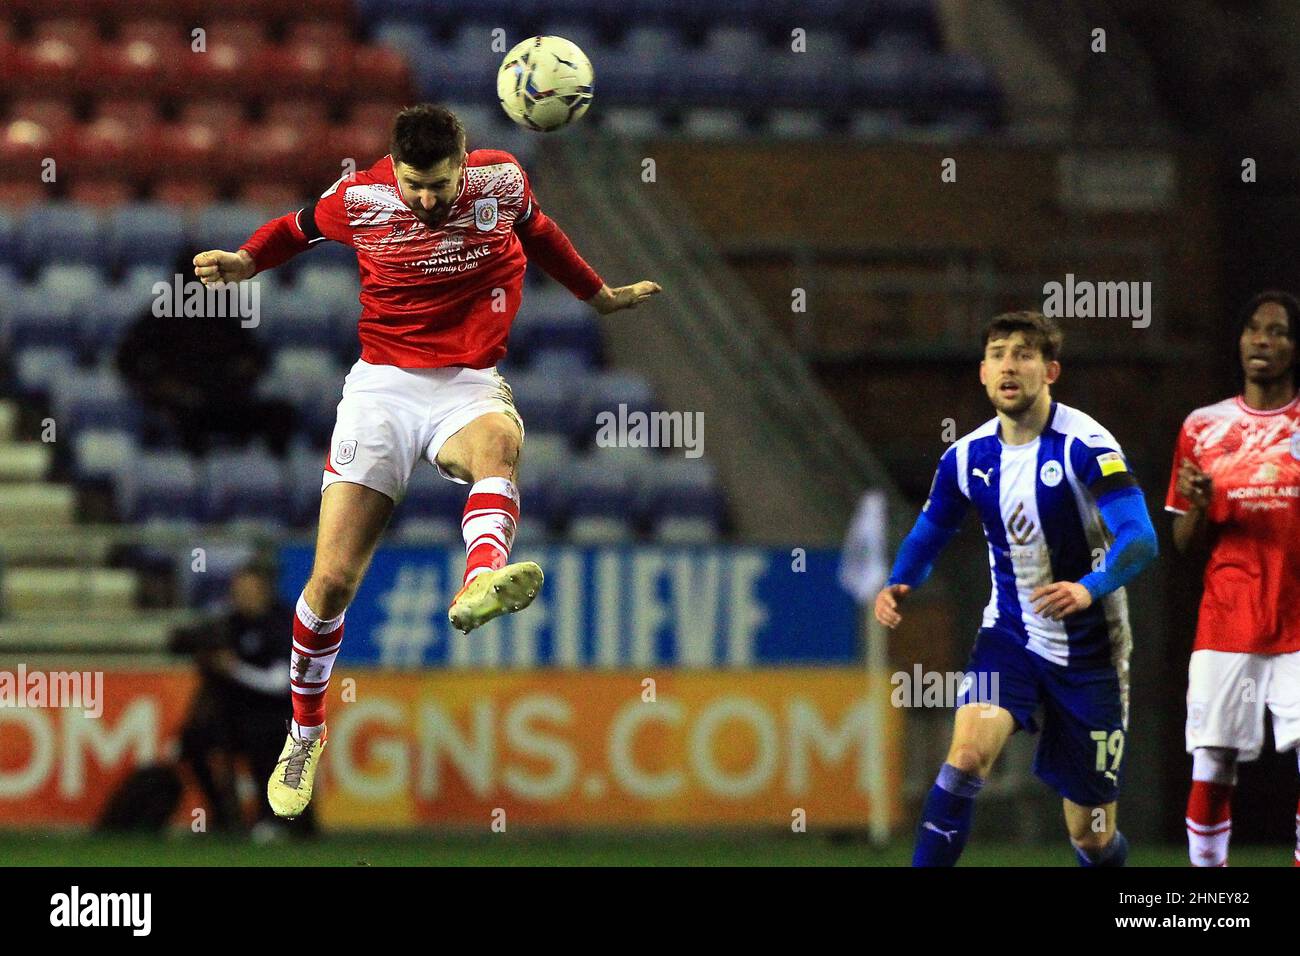 Wigan, UK. 15th Feb, 2022. Luke Murphy of Crewe Alexandra during the Sky Bet League One match between Wigan Athletic and Crewe Alexandra at DW Stadium on February 15th 2022 in Wigan, England. (Photo by Tony Taylor/phcimages.com) Credit: PHC Images/Alamy Live News Stock Photo